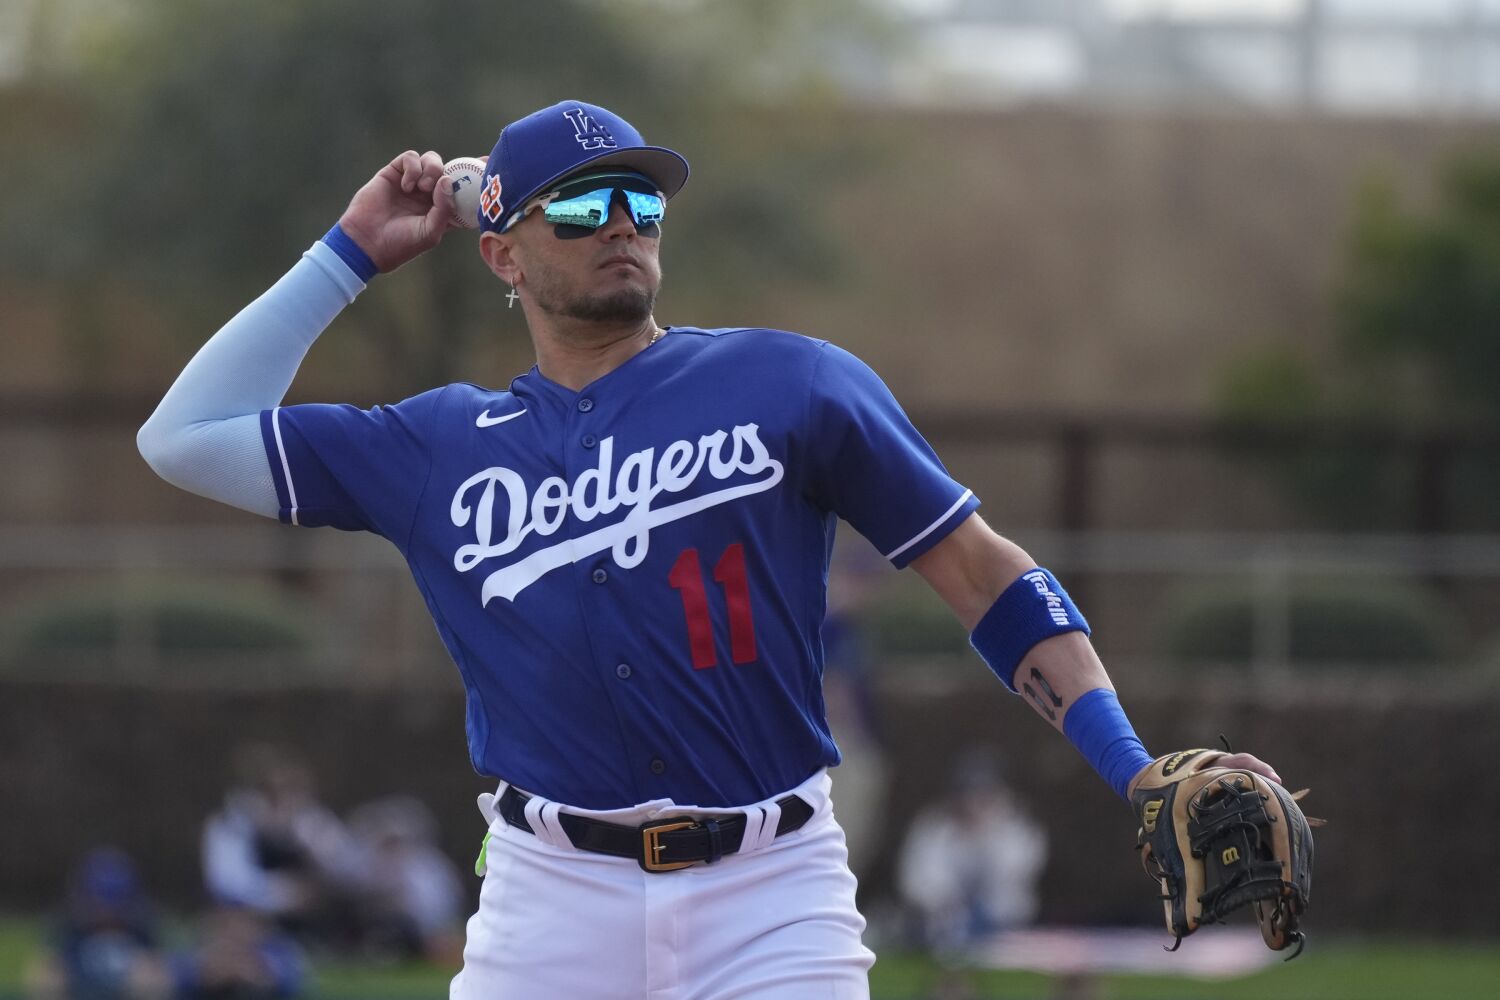 'His shoe game is pretty tight.' Why Dodgers hope Miguel Rojas' play matches his 'swag'